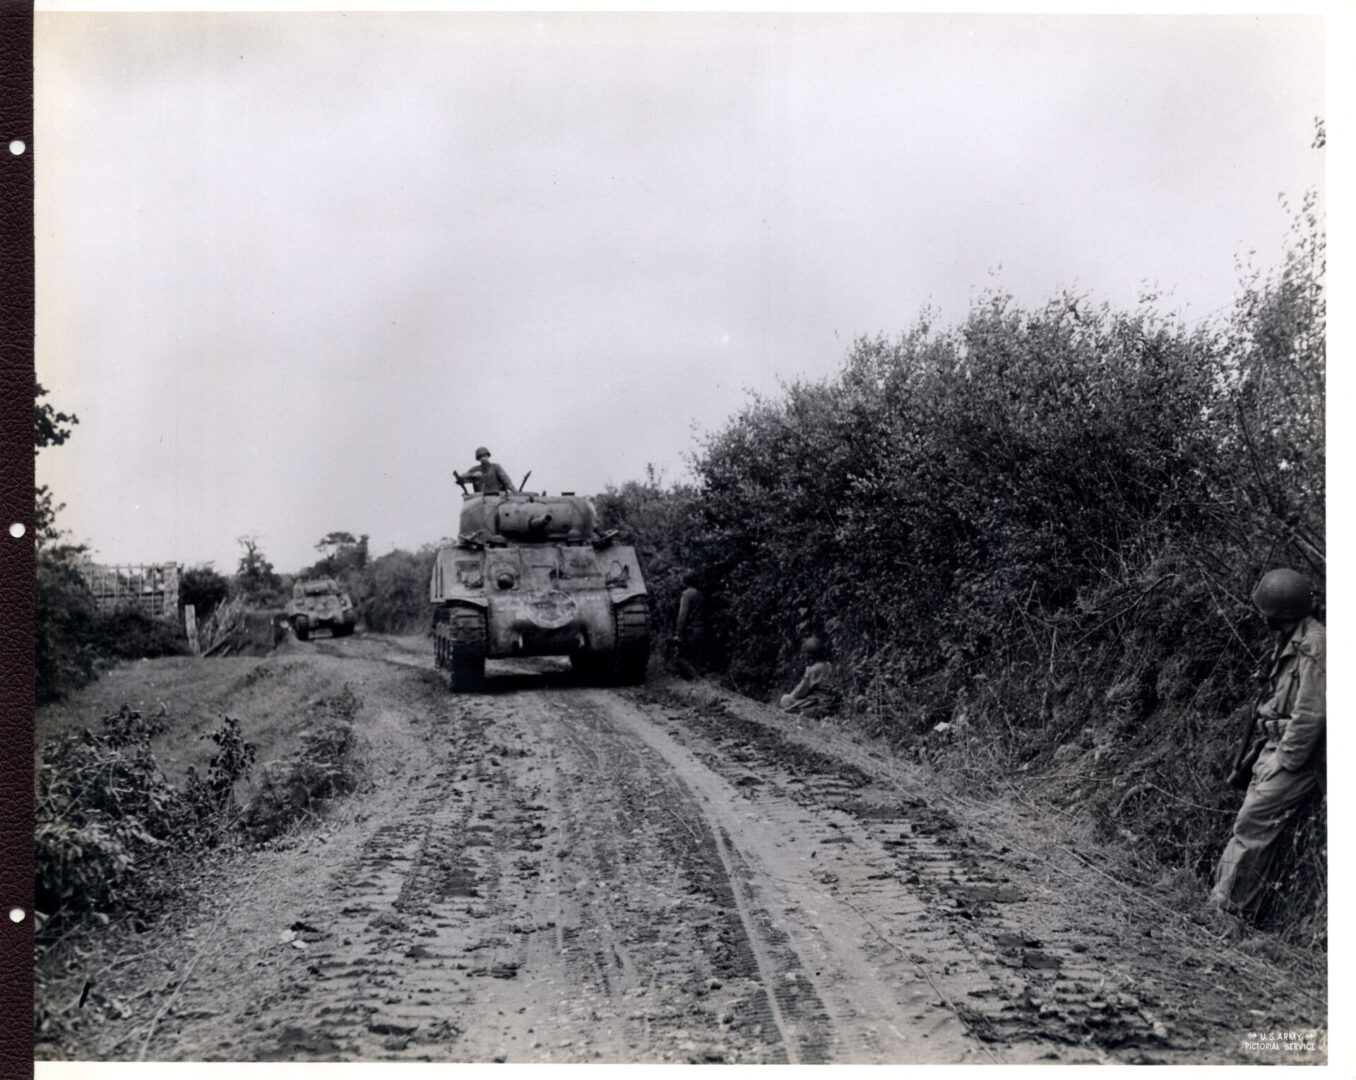 Tanks approach to provide reinforcement to the troops